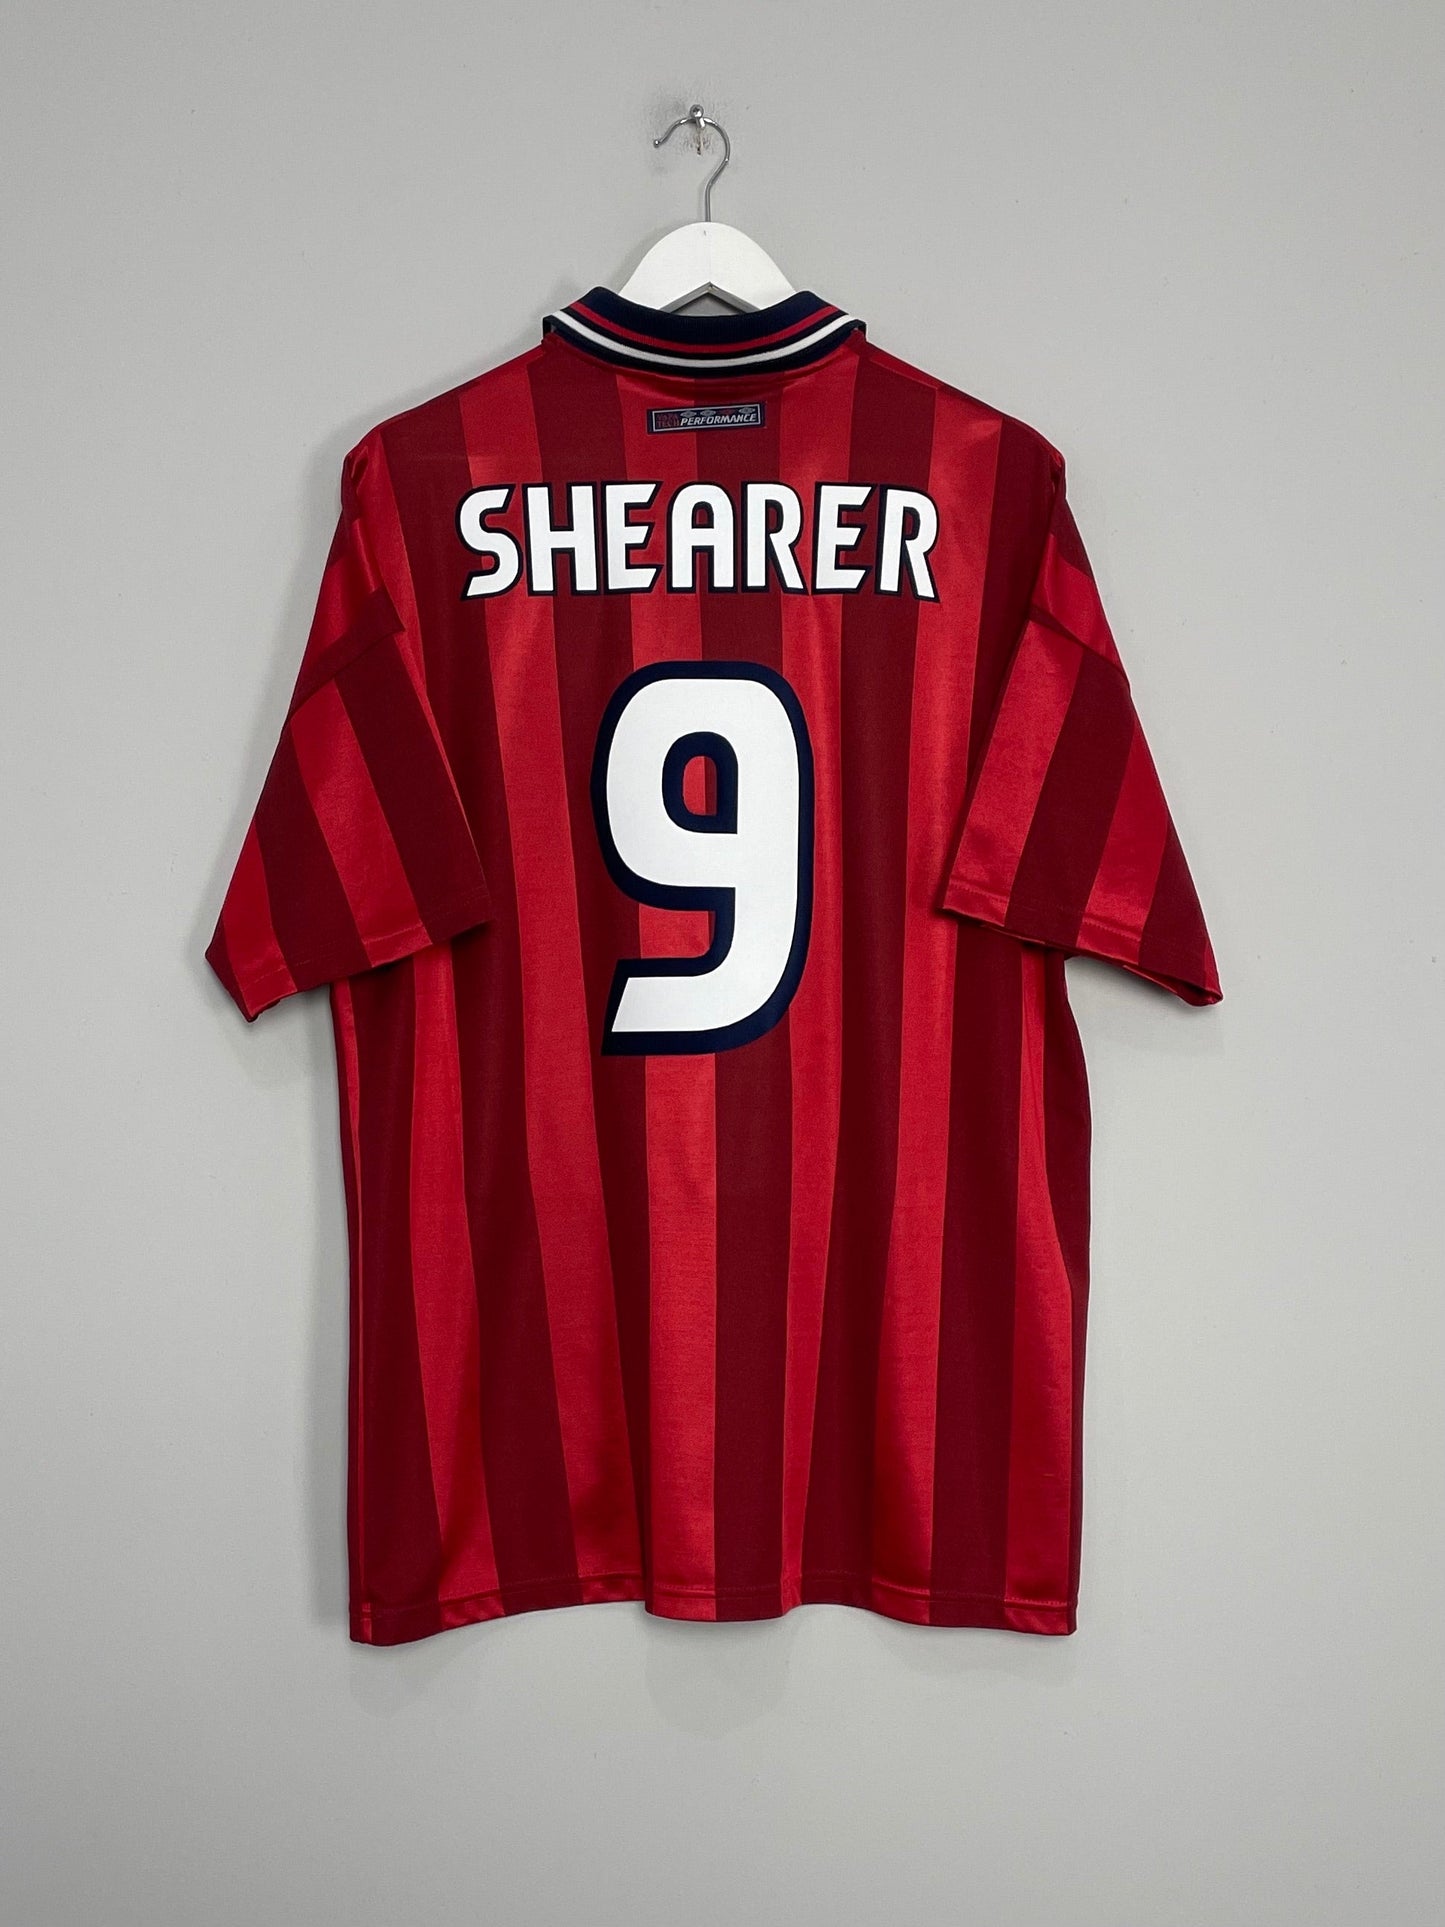 Image of the England Shearer shirt from the 1998/99 season